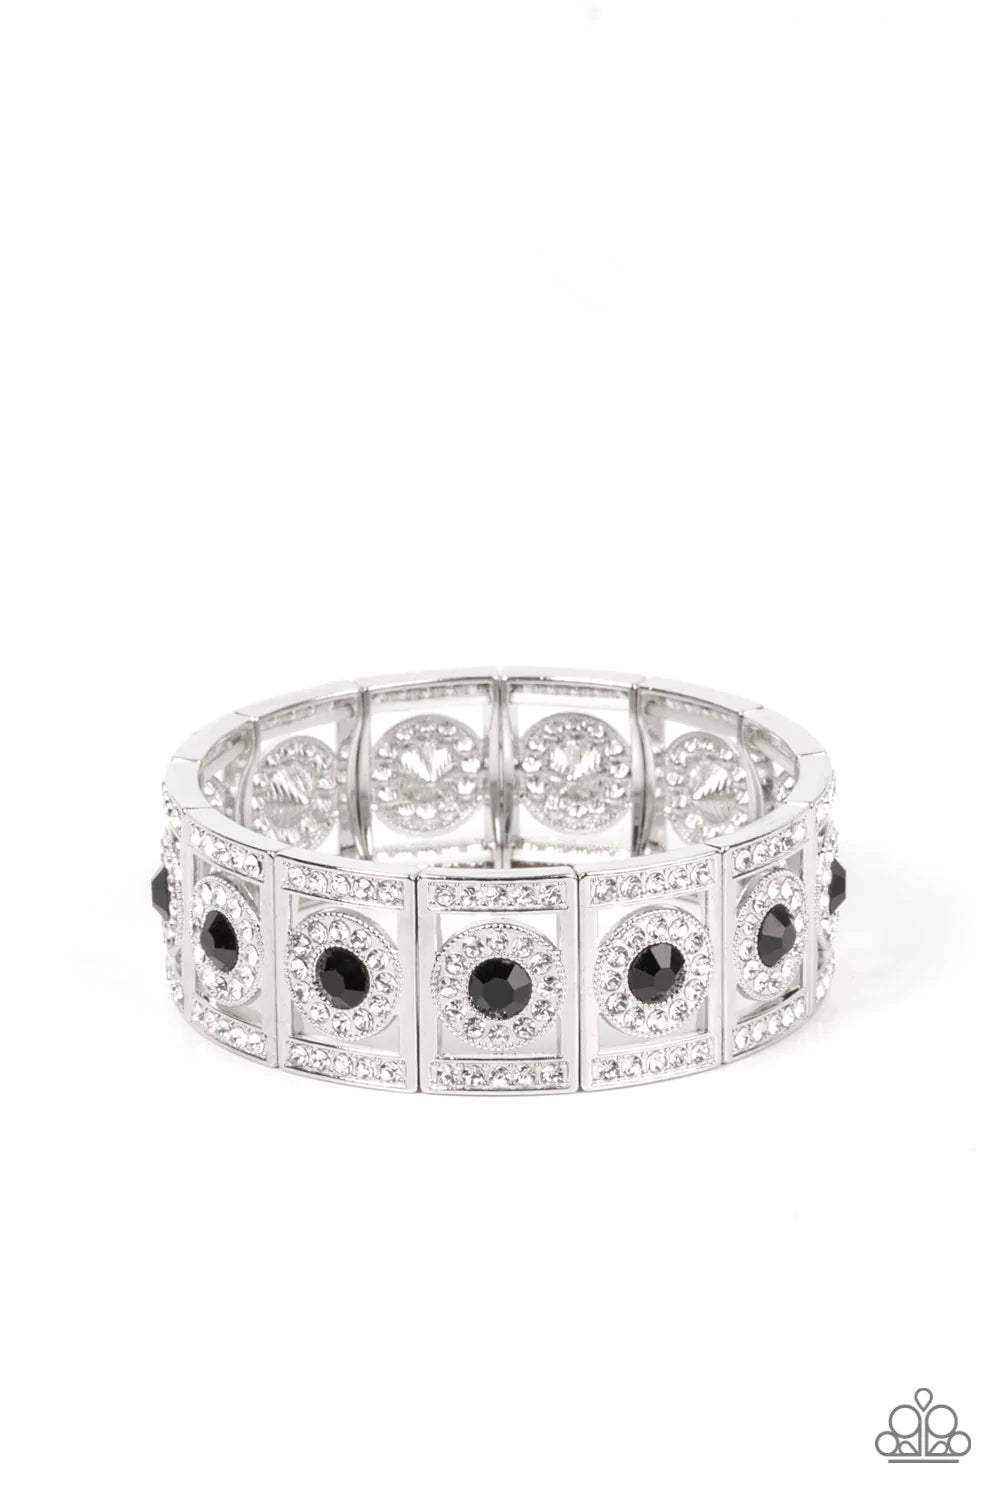 Paparazzi Accessories Ultra Upscale - Black A glassy black rhinestone is pressed into a ring of glitzy white rhinestones inside a rectangular silver frame dusted in dazzling white rhinestones. The timeless frames sparkle along stretchy bands around the wr